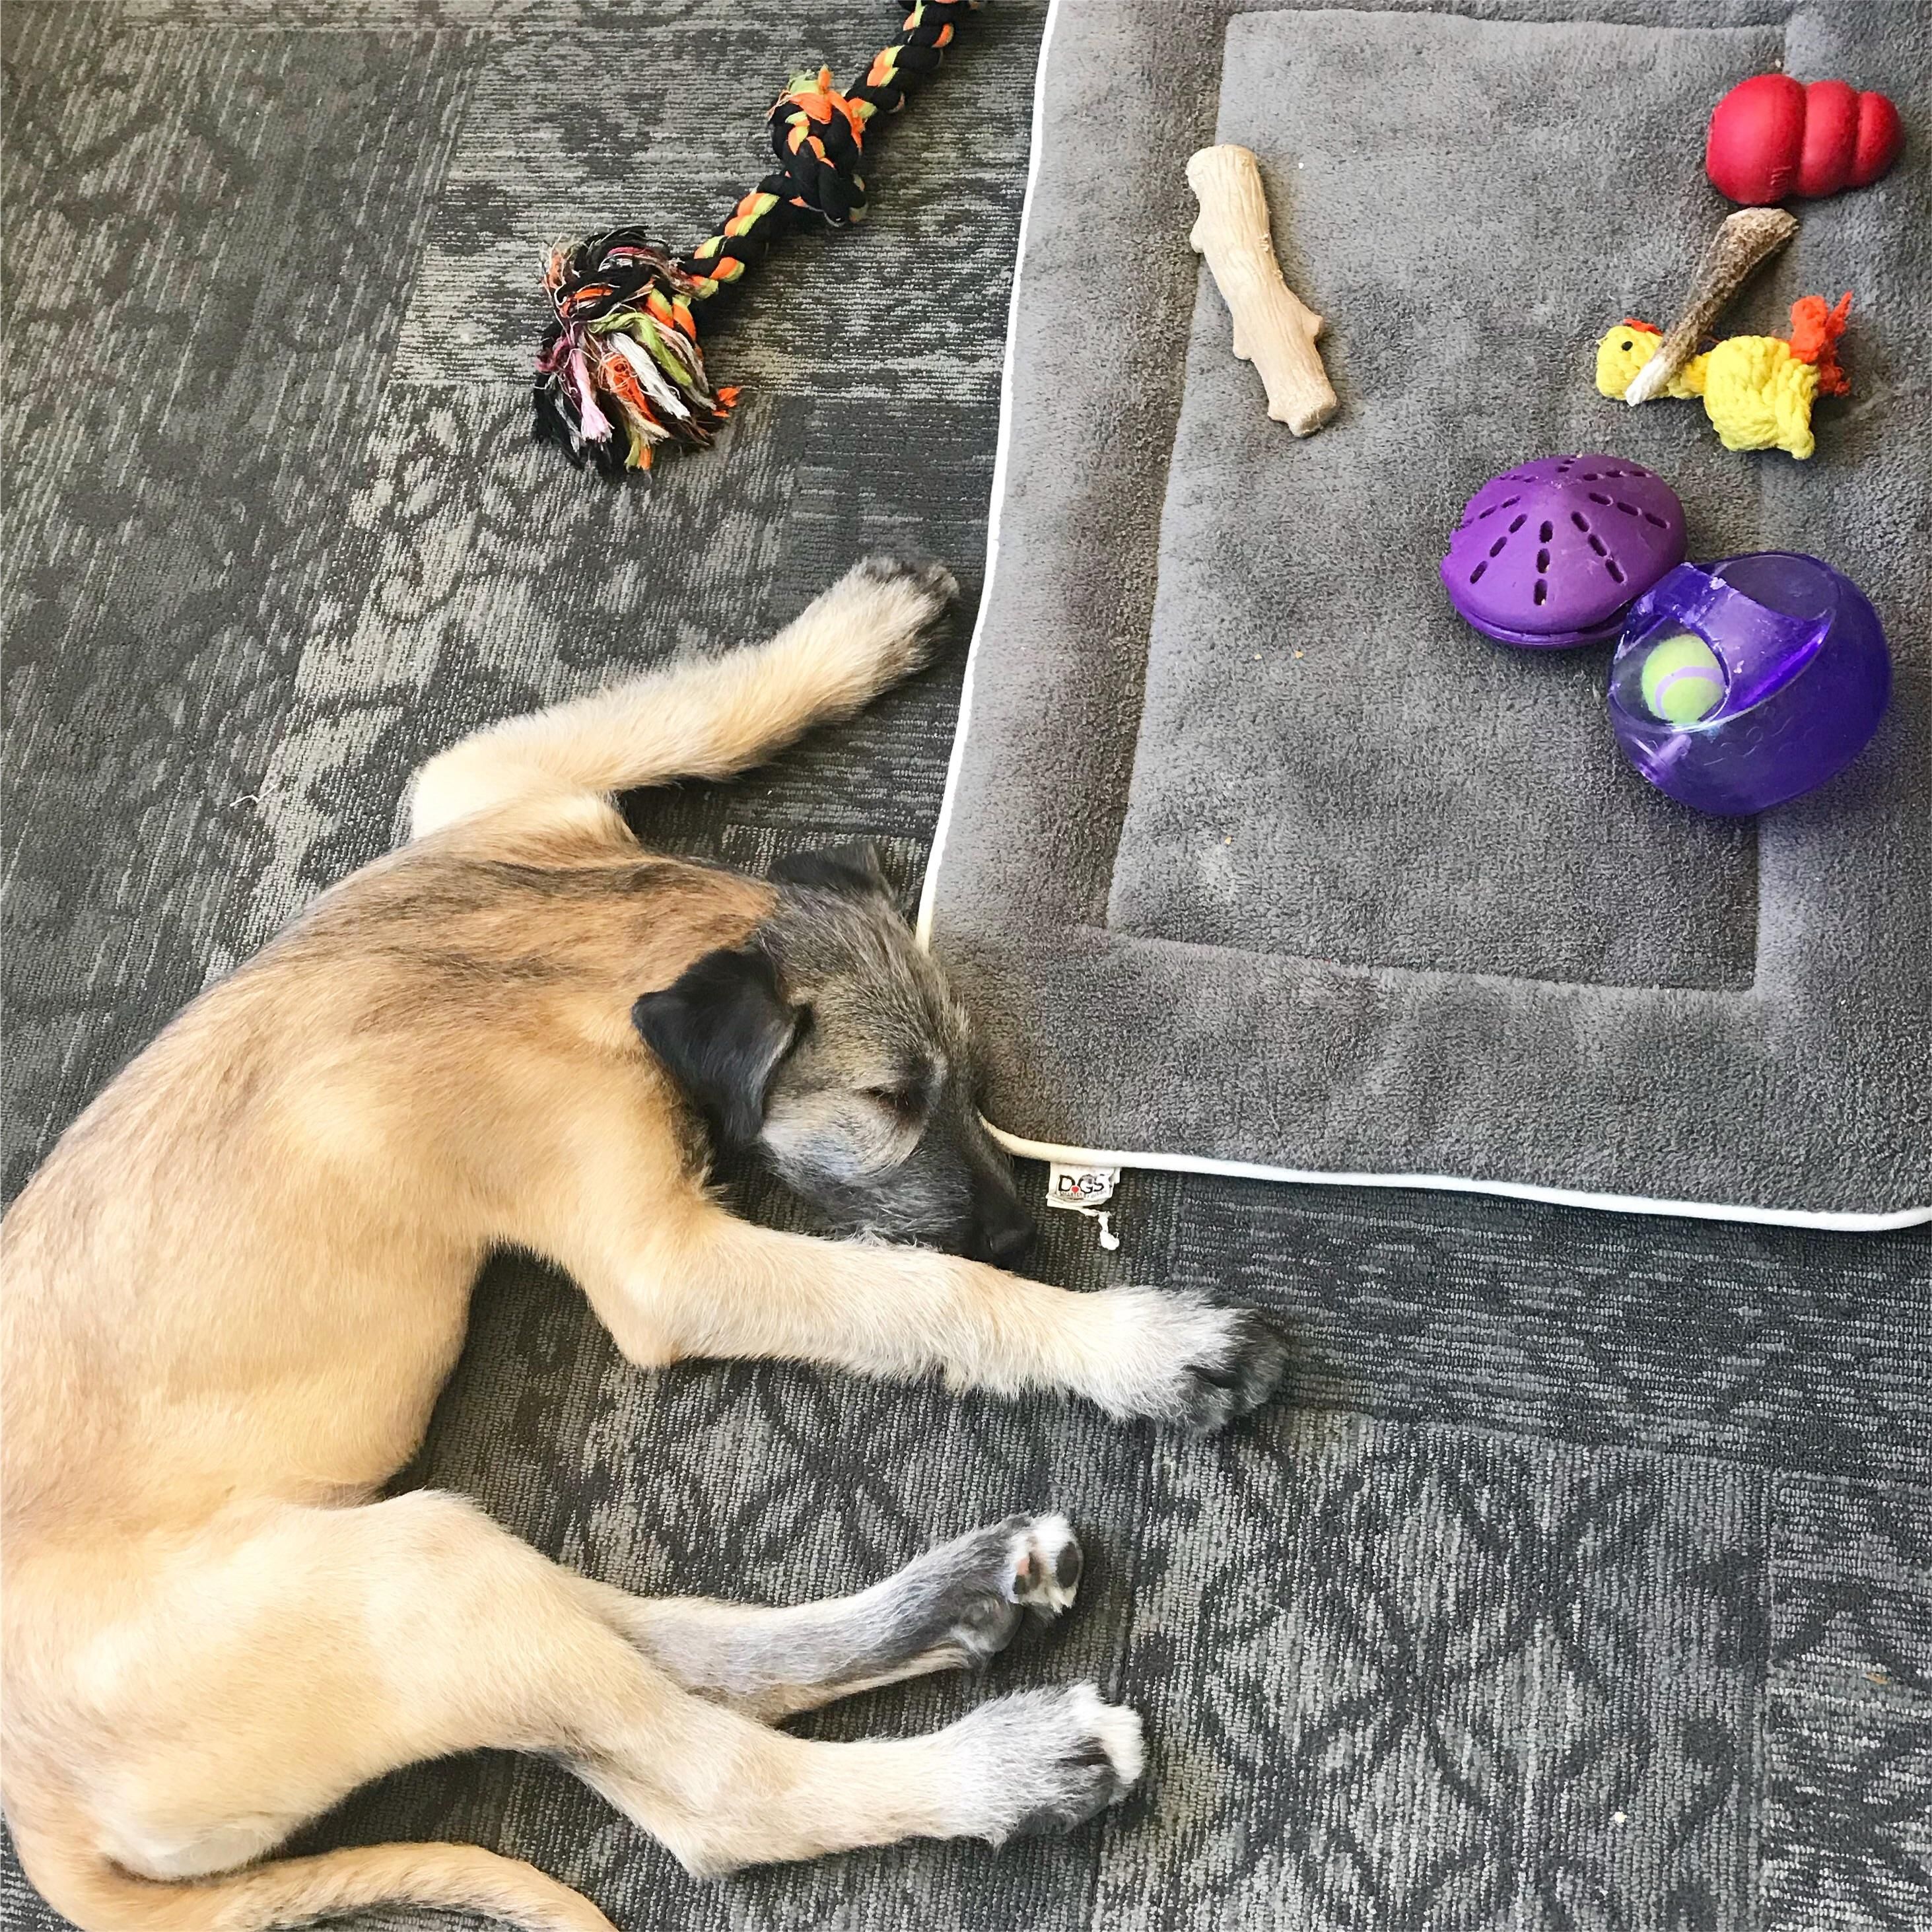 My pup places his toys on his bed and then sleeps on the ground. Go figure!